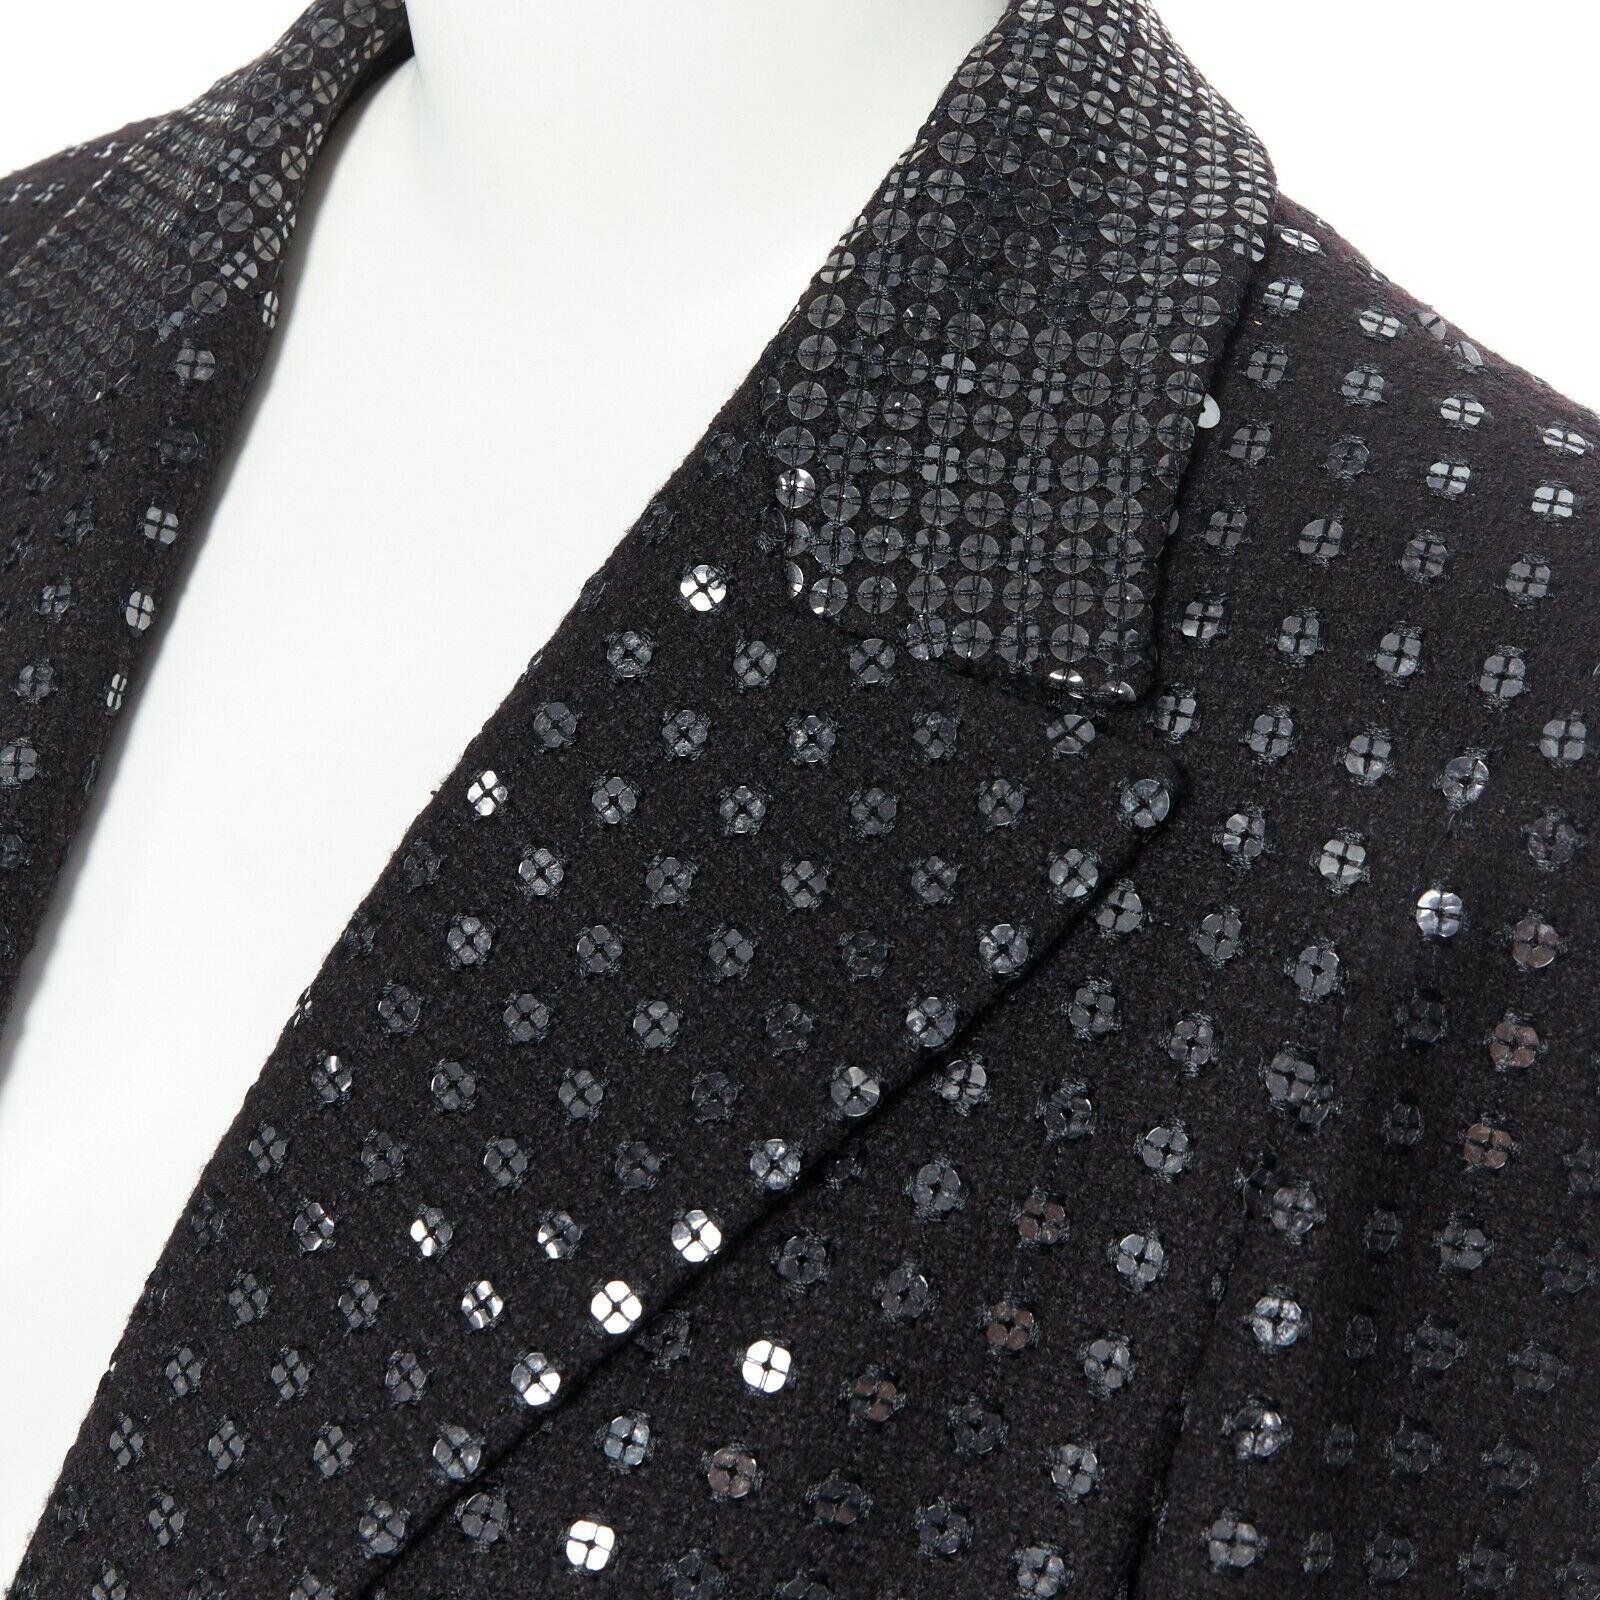 CHANEL 02C black sequinned tweed bejewel buttons swallowtail tuxedo jacket FR44
Brand: CHANEL
Designer: Karl Lagerfeld
Collection: 02C
Model Name / Style: Tweed jacket
Material: Wool
Color: Black
Pattern: Solid with sequins embellishments
Closure: